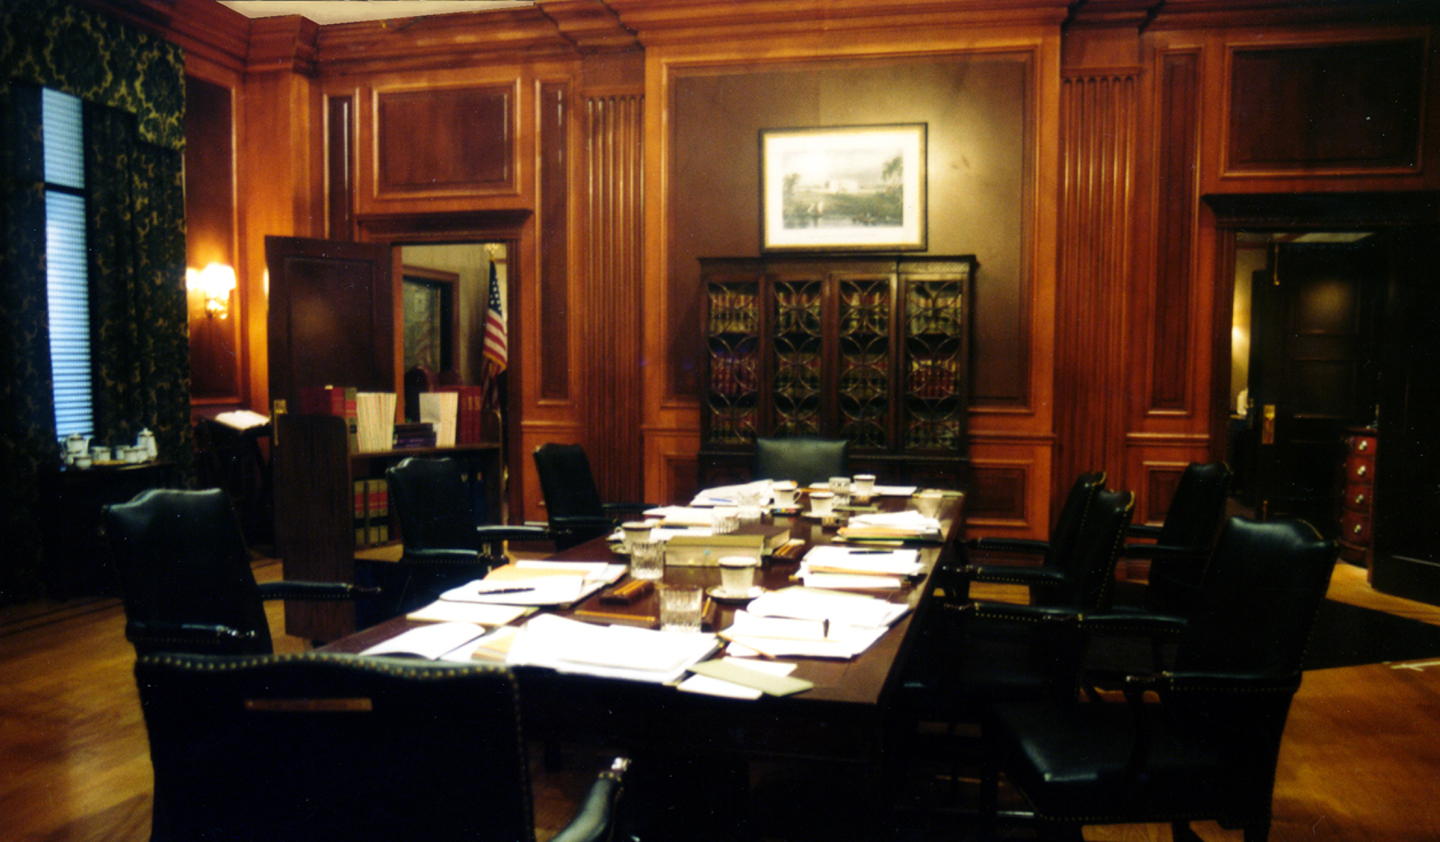 The Court - Chief Justice's Conference Room